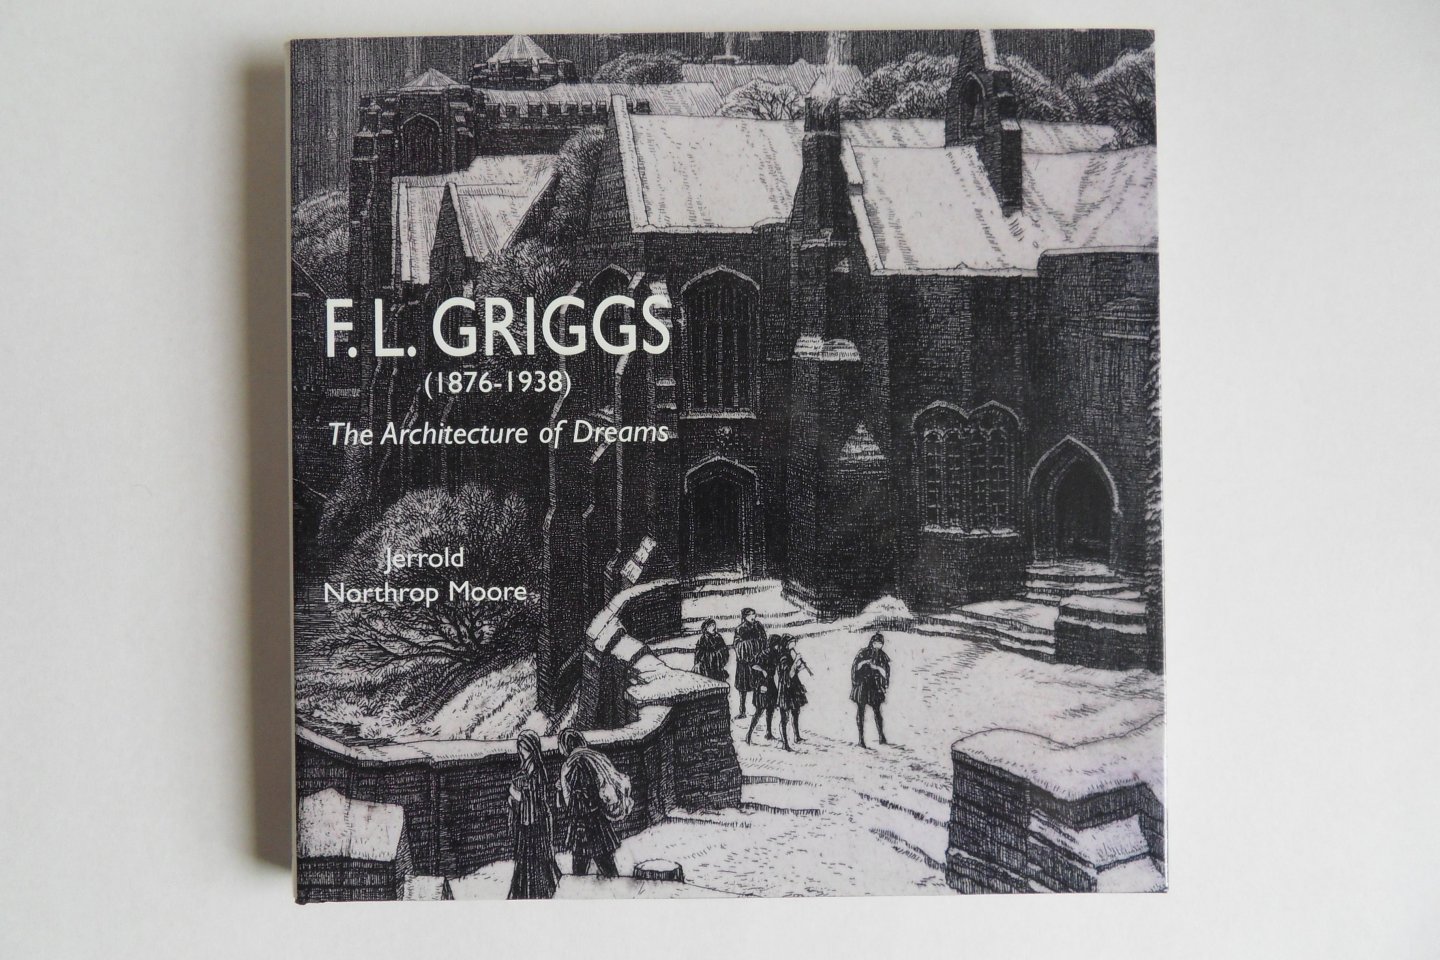 Moore, Jerrold Northrop. - F.L. Griggs (1876-1938). - The Architecture of Dreams. + Catalogue of the Centenary Exhibition.